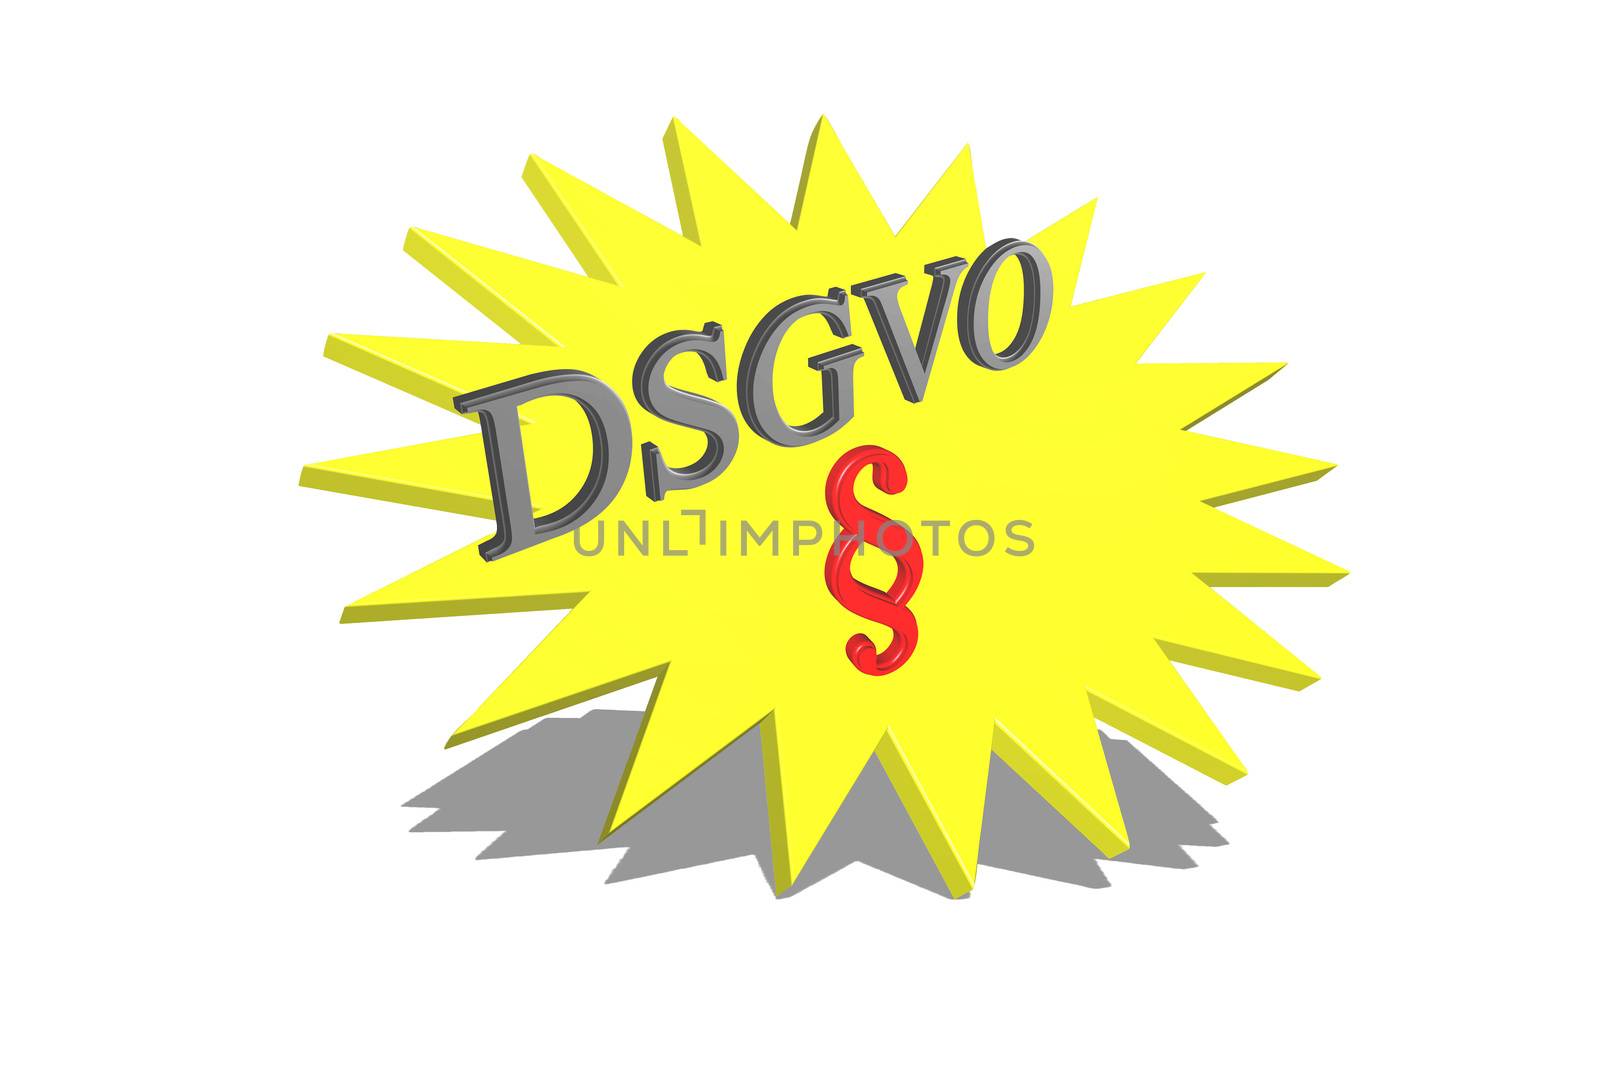 DSGVO Basic Data Protection Regulation, concept in 3D with shadow